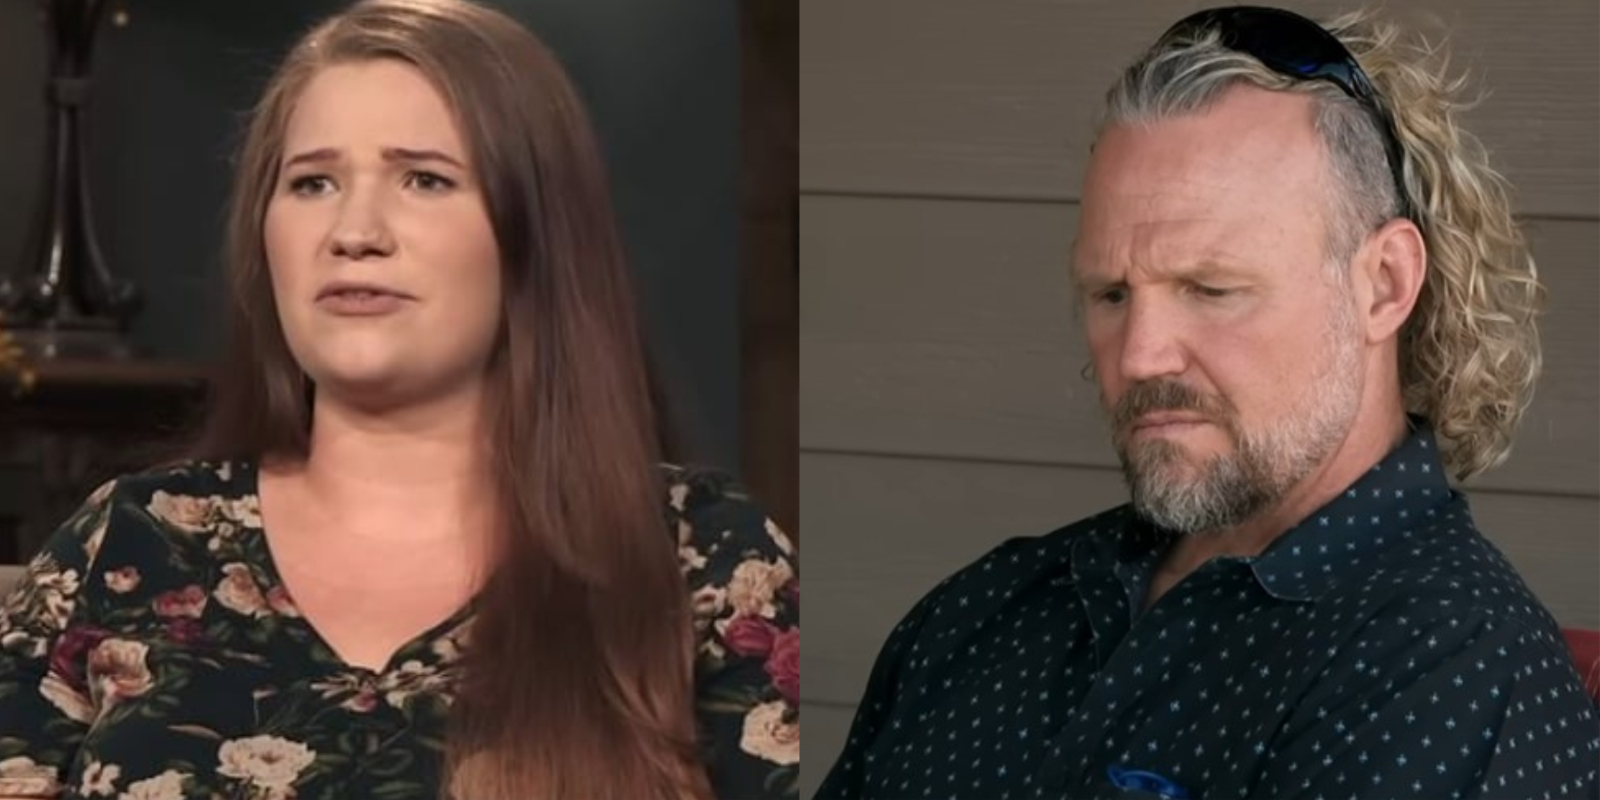 Mykelti Padron and Kody Brown in side-by-side photographs taken on the set of TLC's 'Sister Wives.'